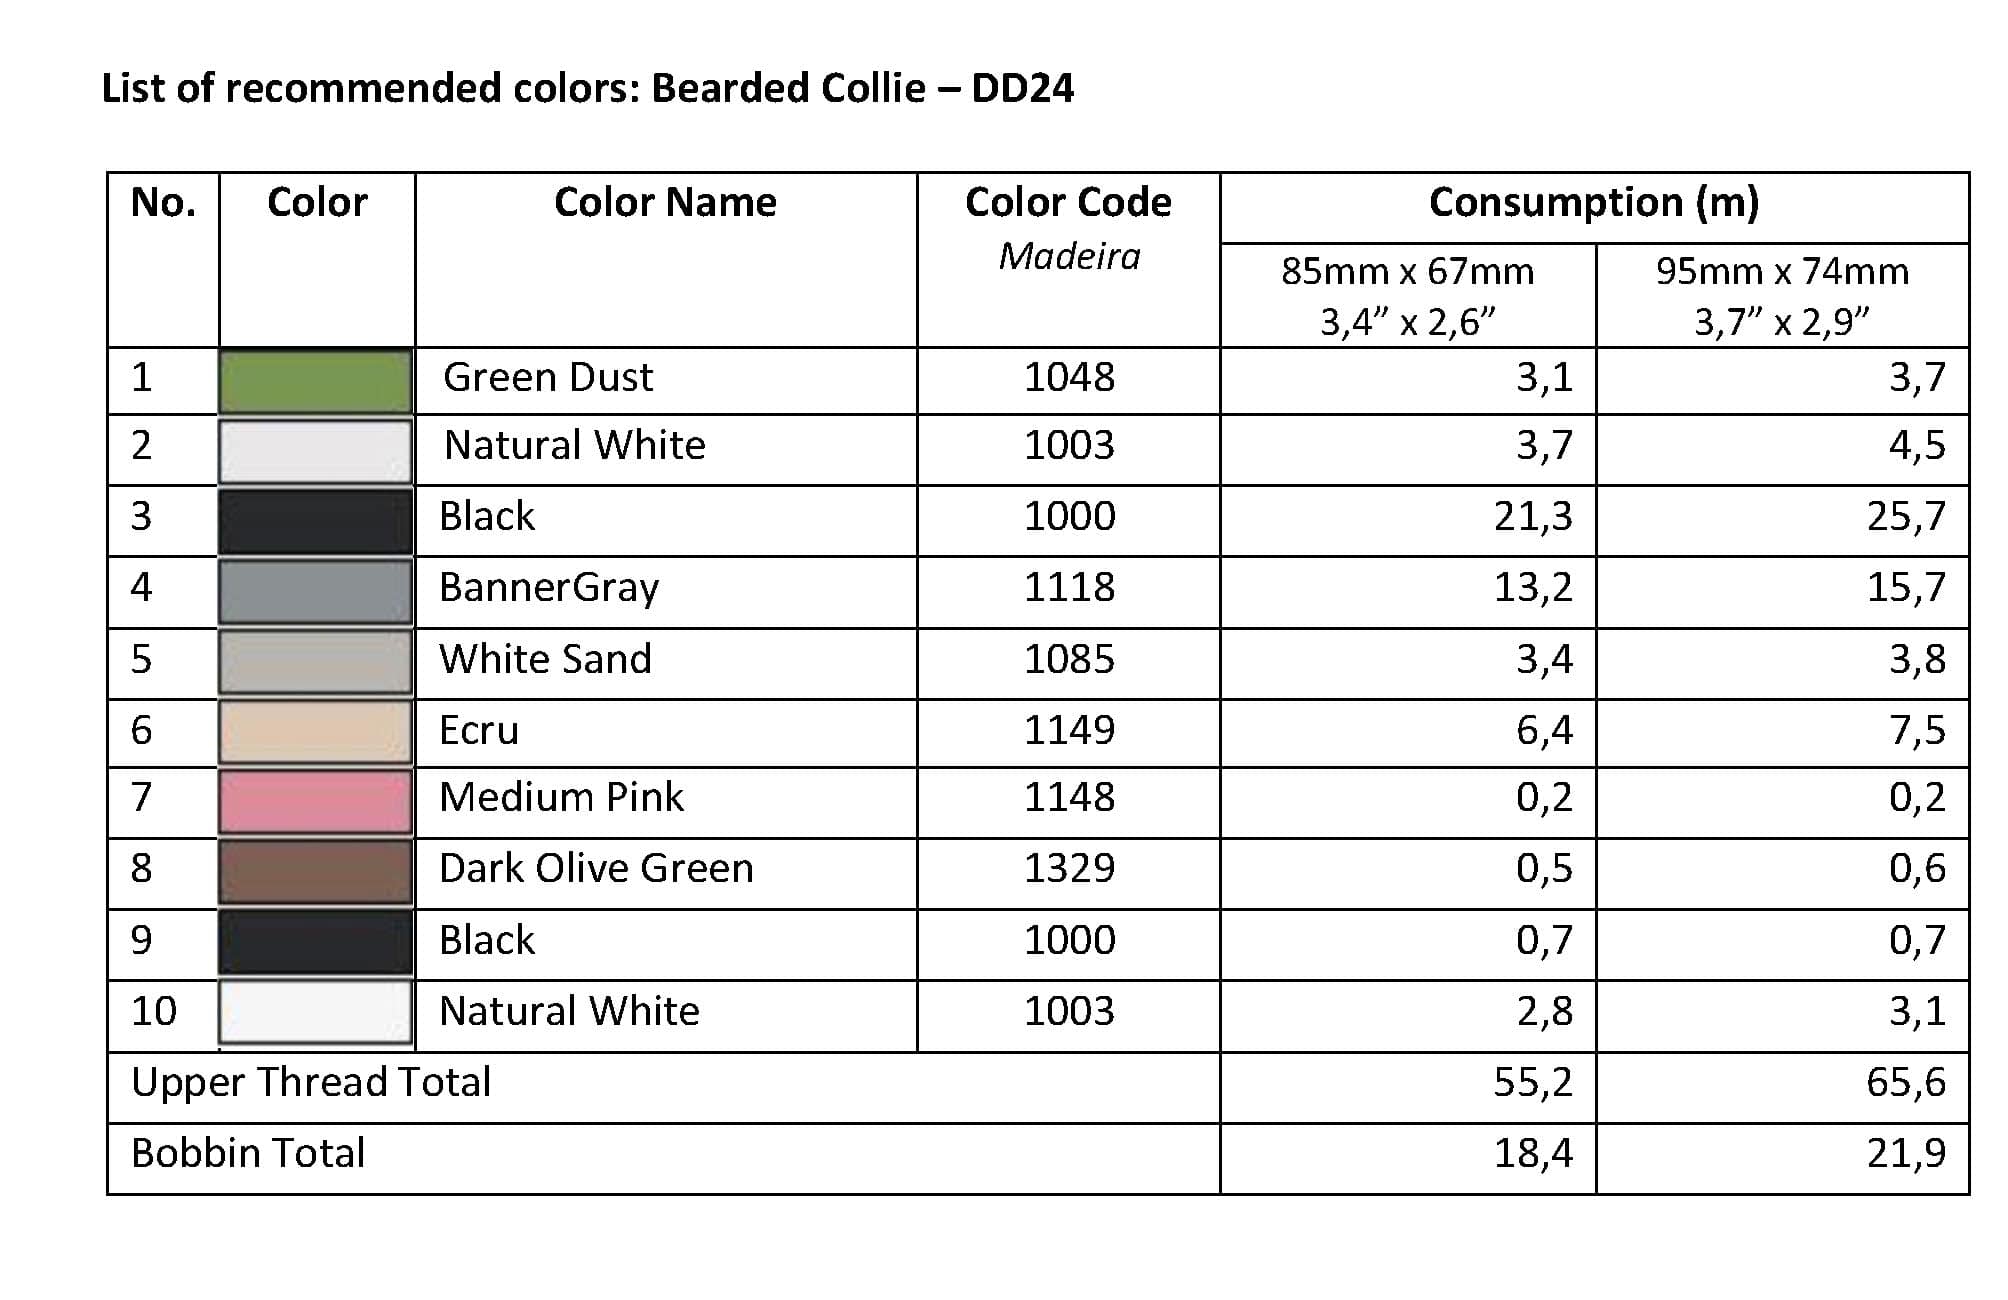 List of Recommended Colors - Bearded Collie DD24